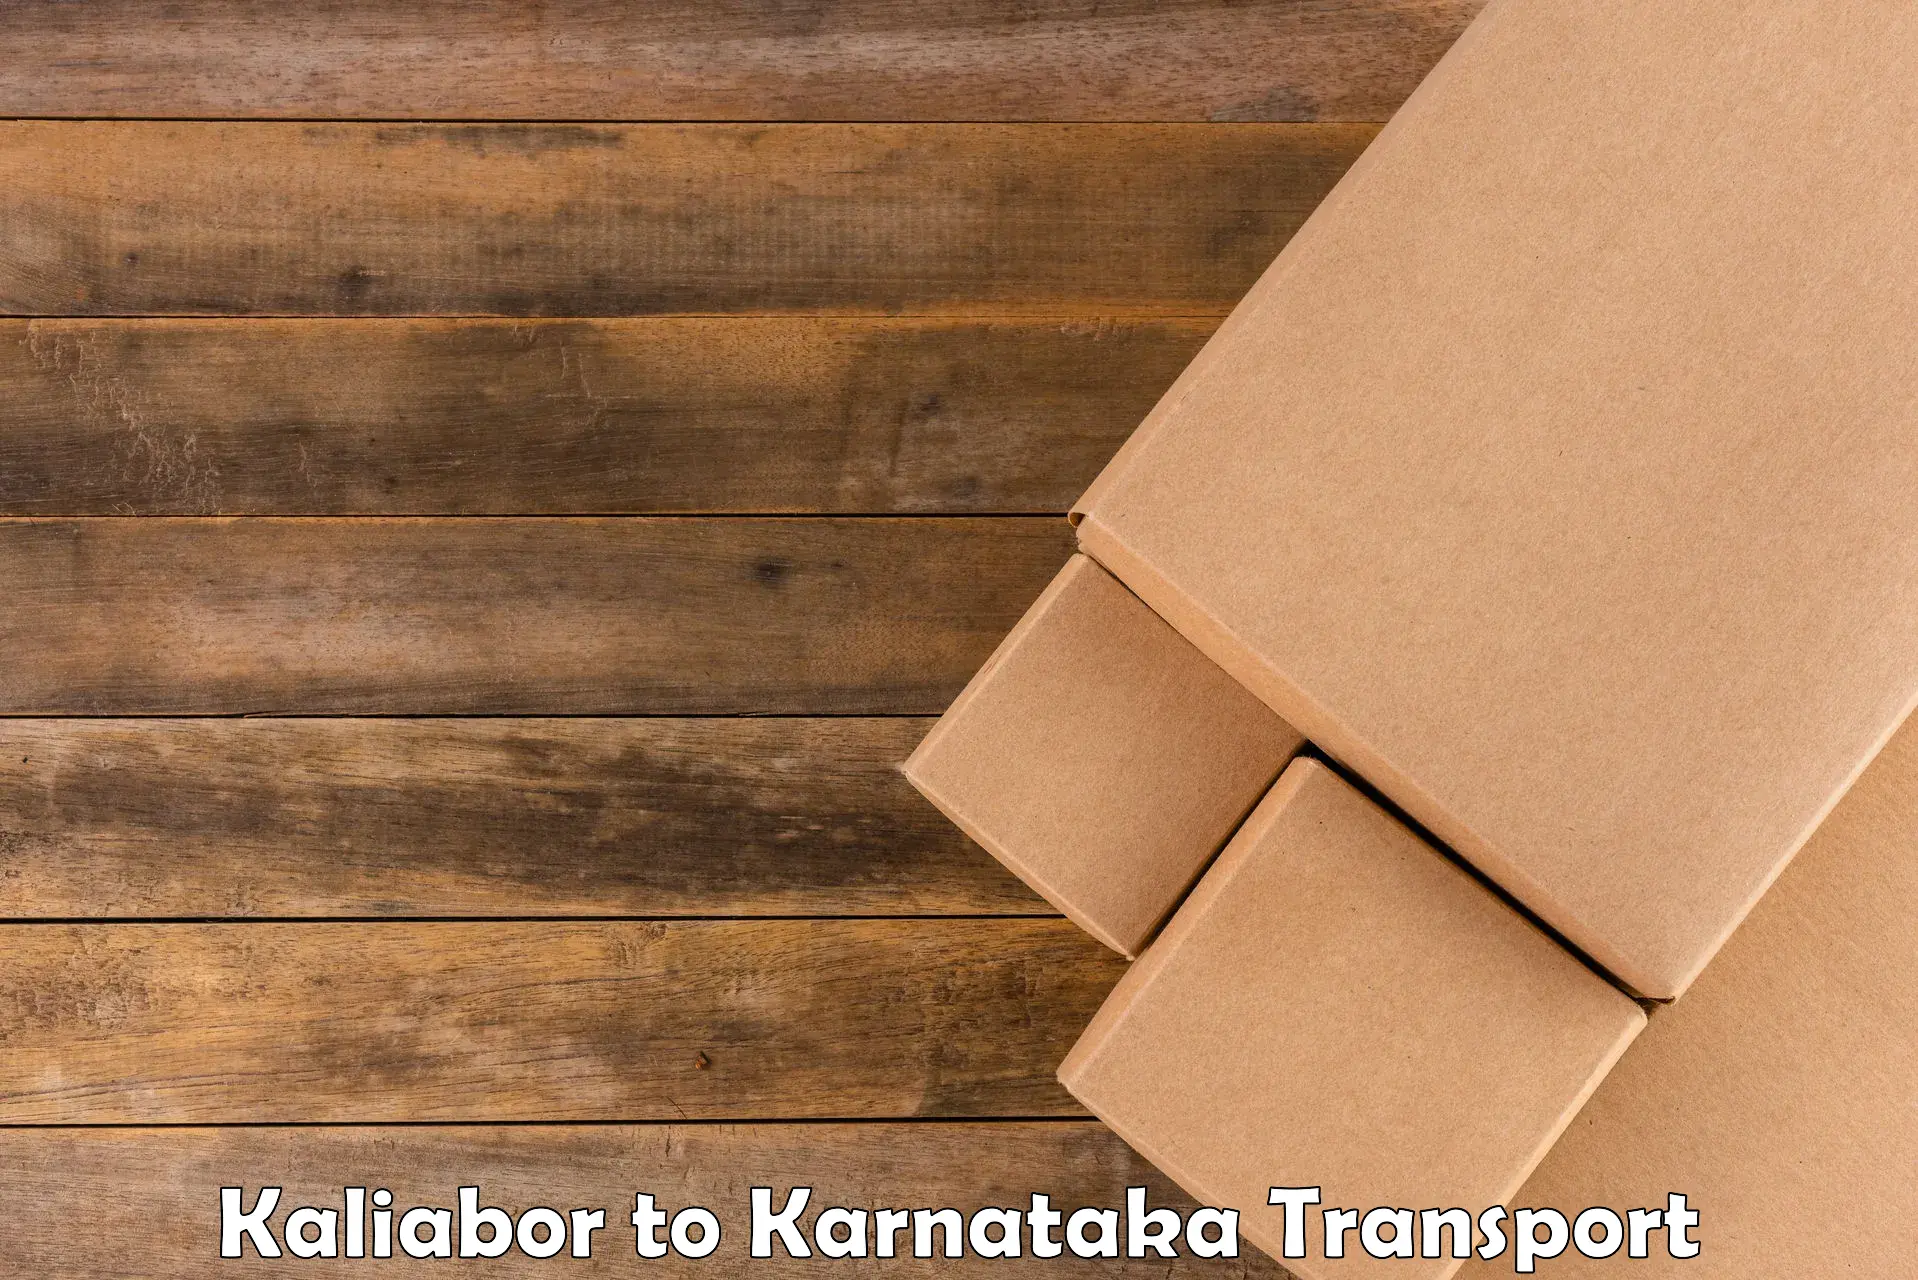 Truck transport companies in India Kaliabor to Hungund